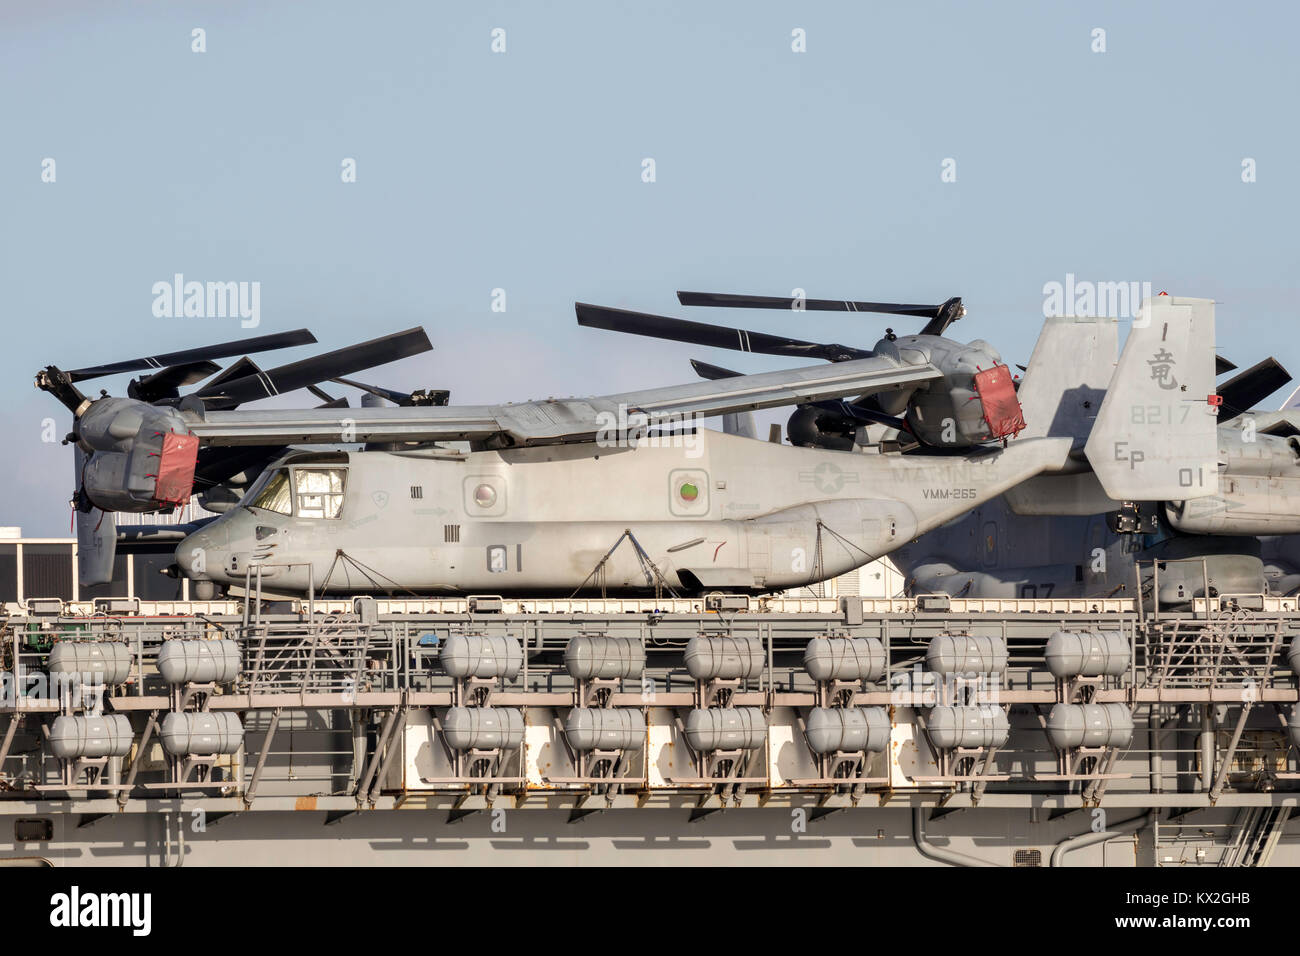 Bell Boeing MV-22 Osprey tilt rotor aircraft from the United States Marine Corps  on the deck of Untied States Stock Photo